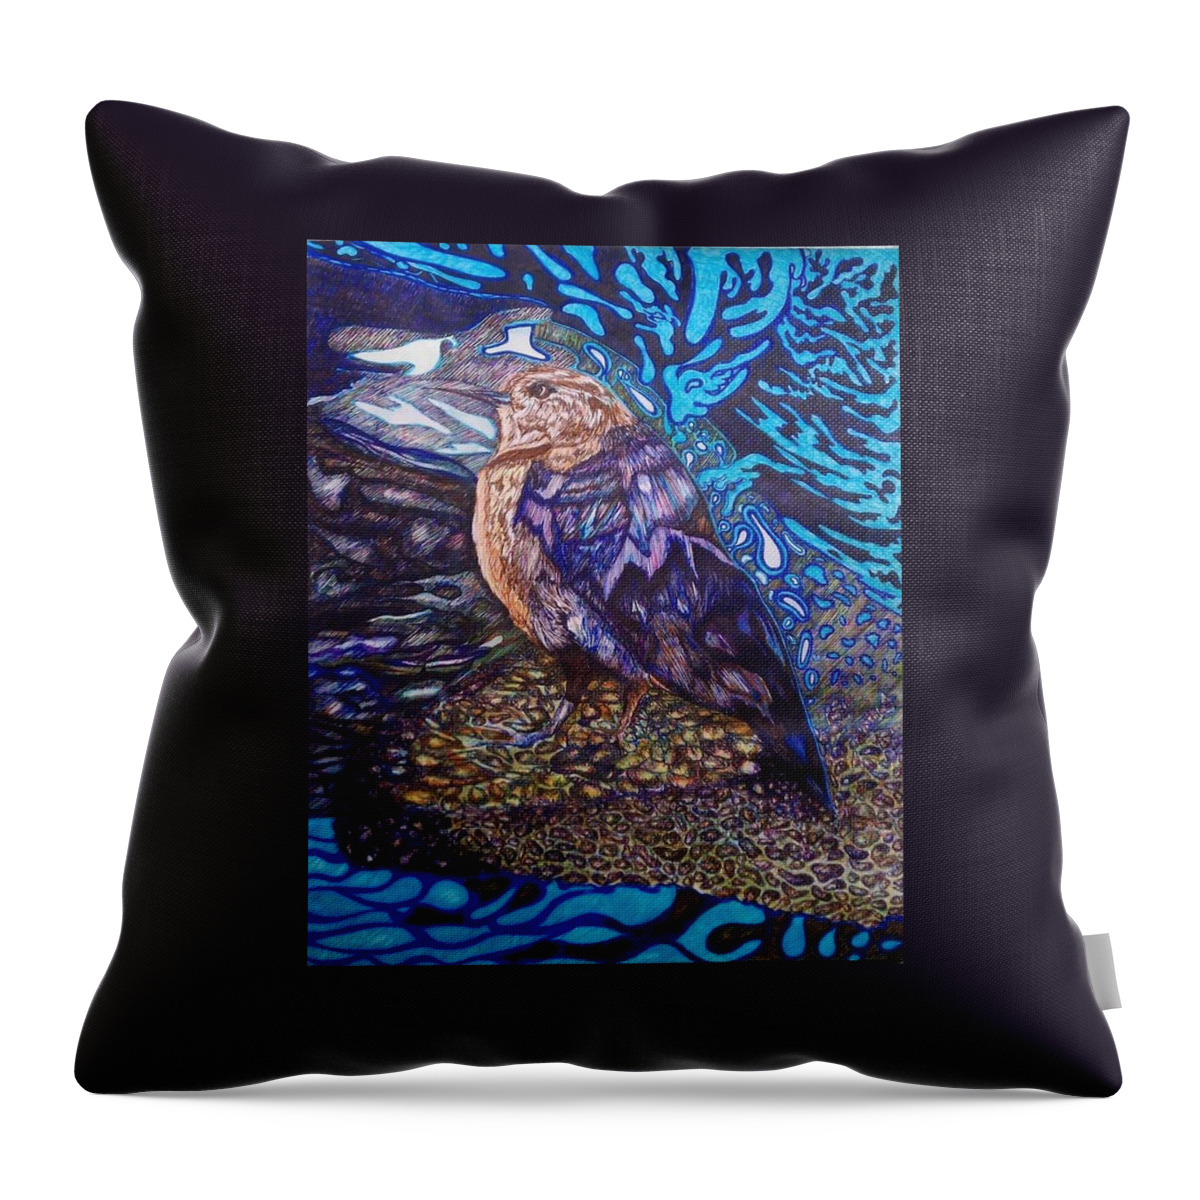 Bird Throw Pillow featuring the drawing Shore Bird by Angela Weddle